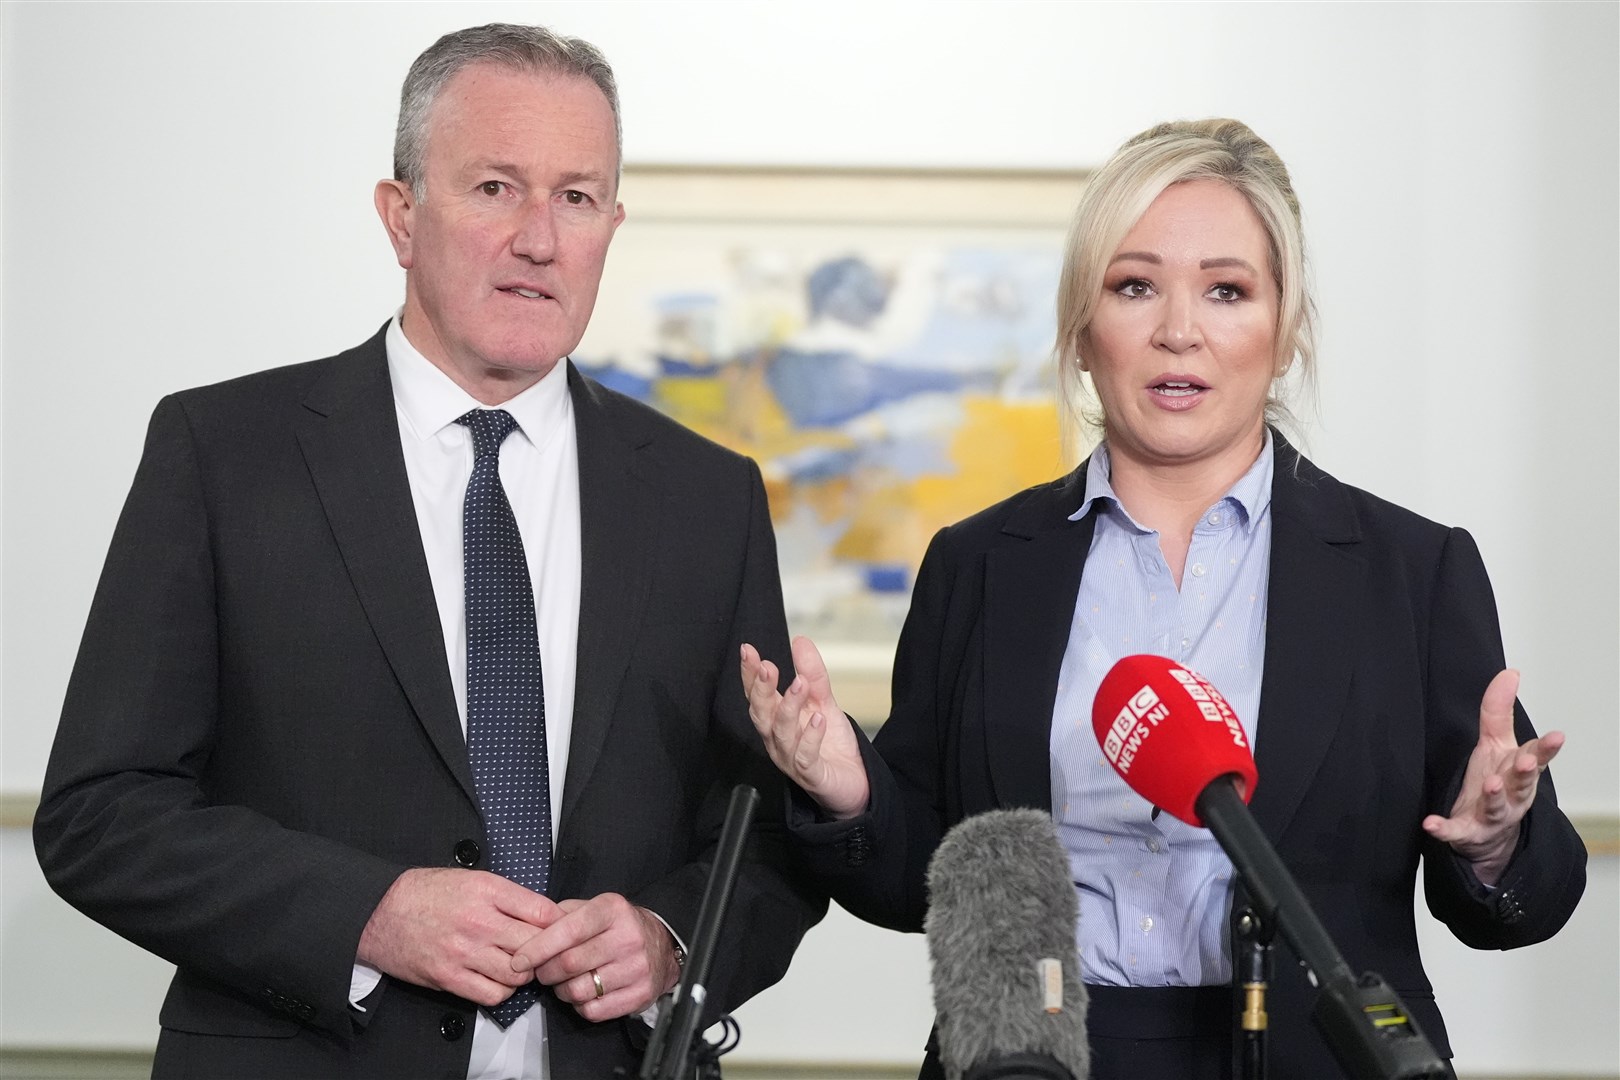 Stormont Economy minister Conor Murphy and First Minister Michelle O’Neill speak to the media following the first East-West Council meeting at Dover House in London (Stefan Rousseau/PA)